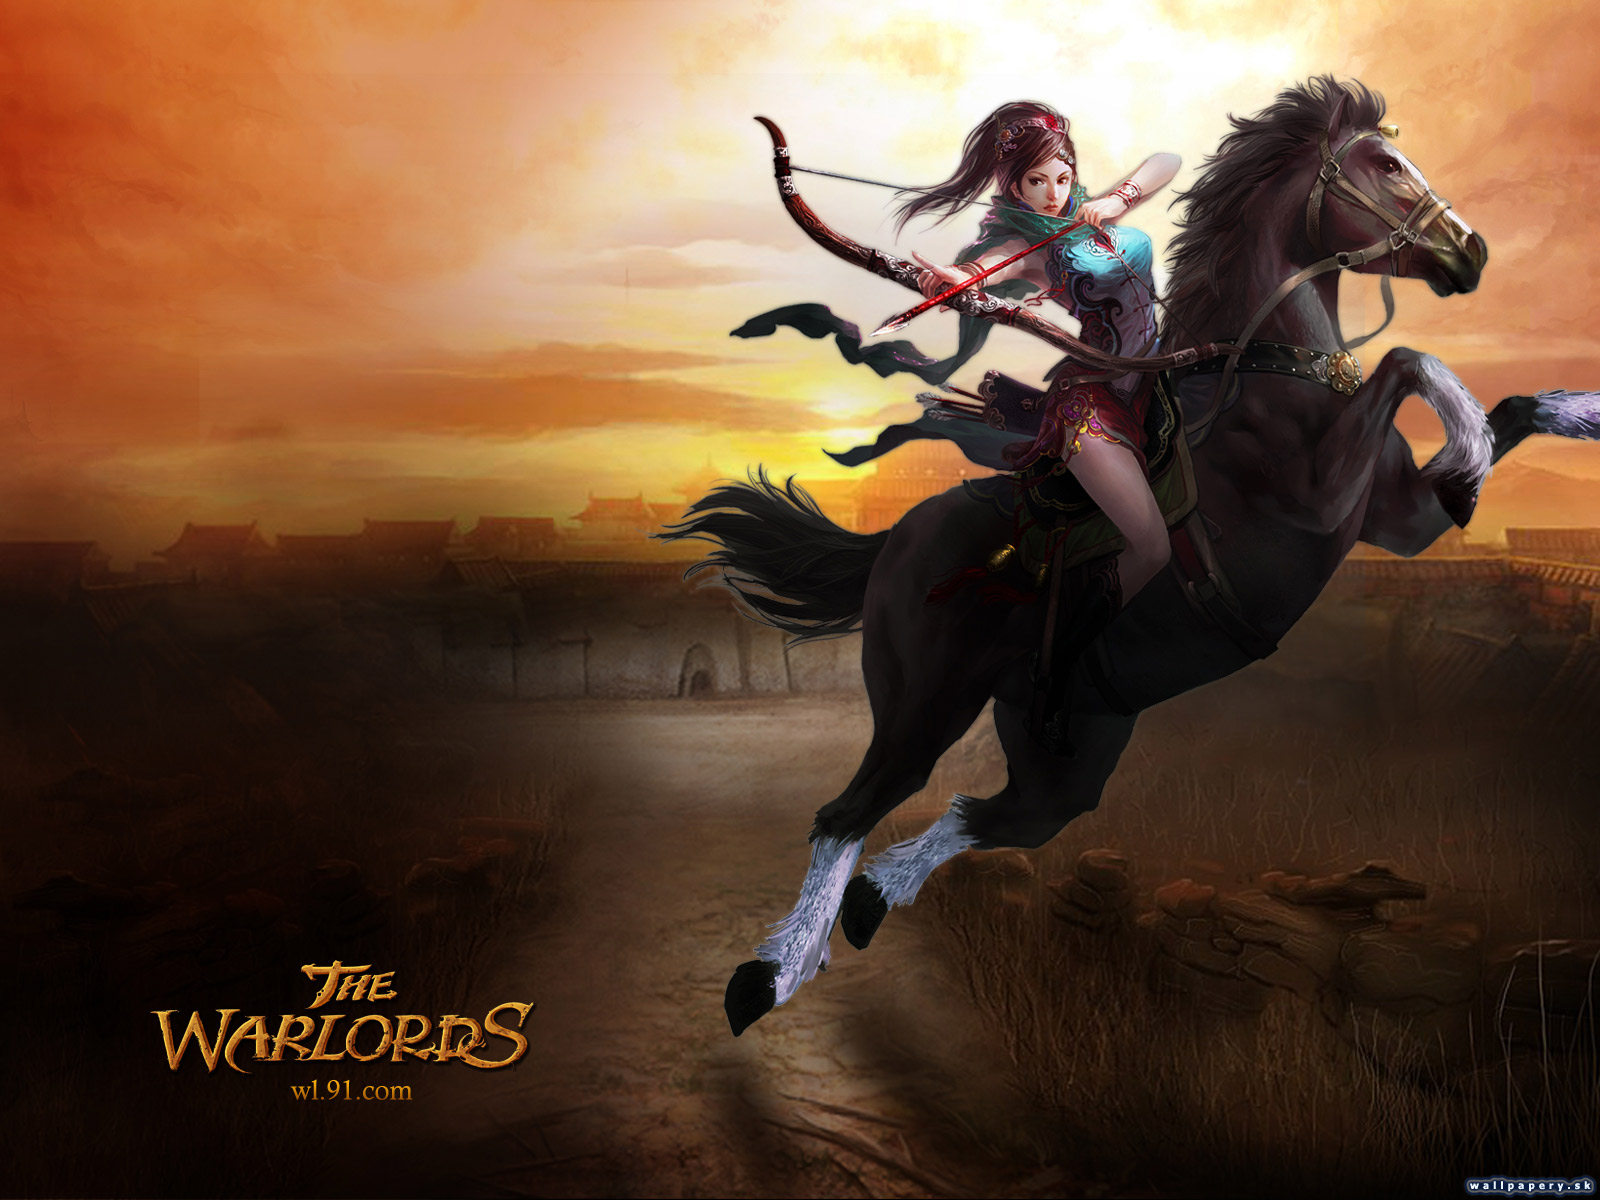 The Warlords - wallpaper 18